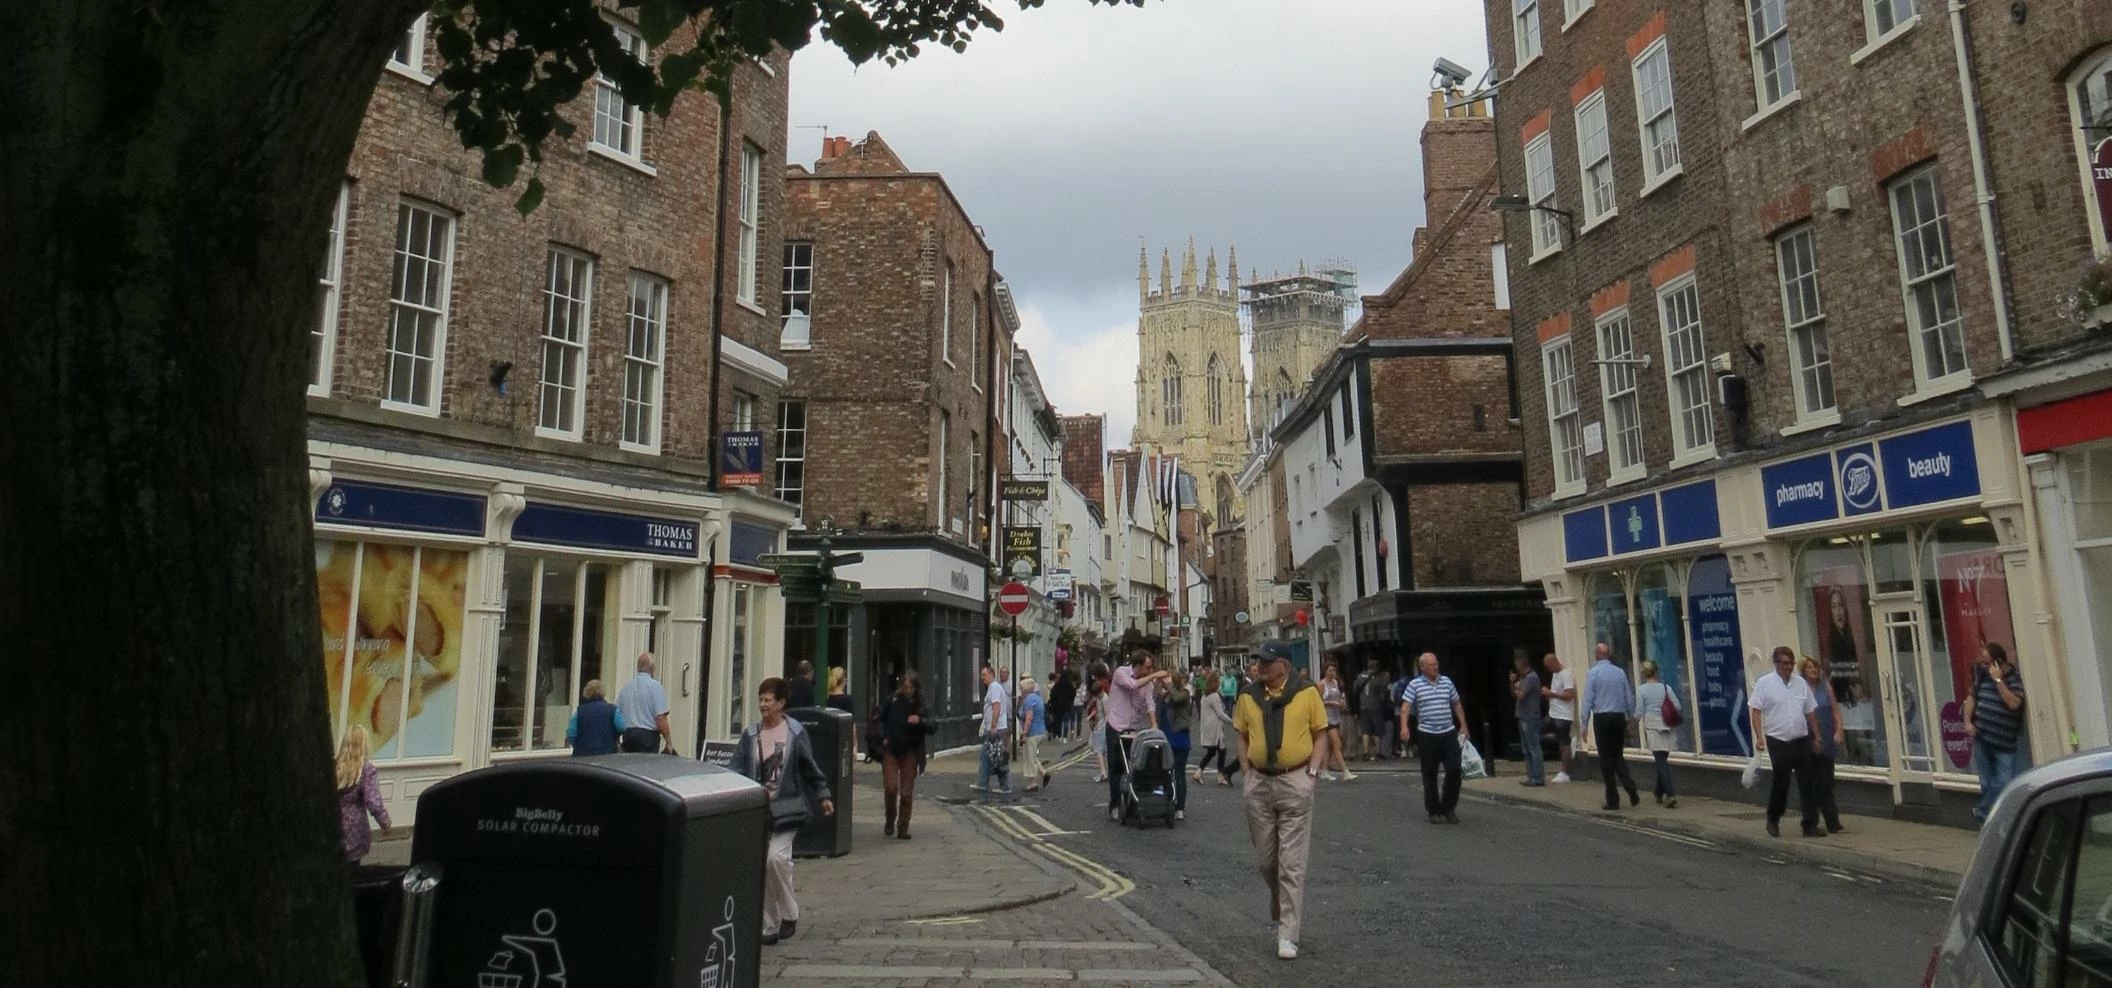 York Minster from the Shambles, August 2013